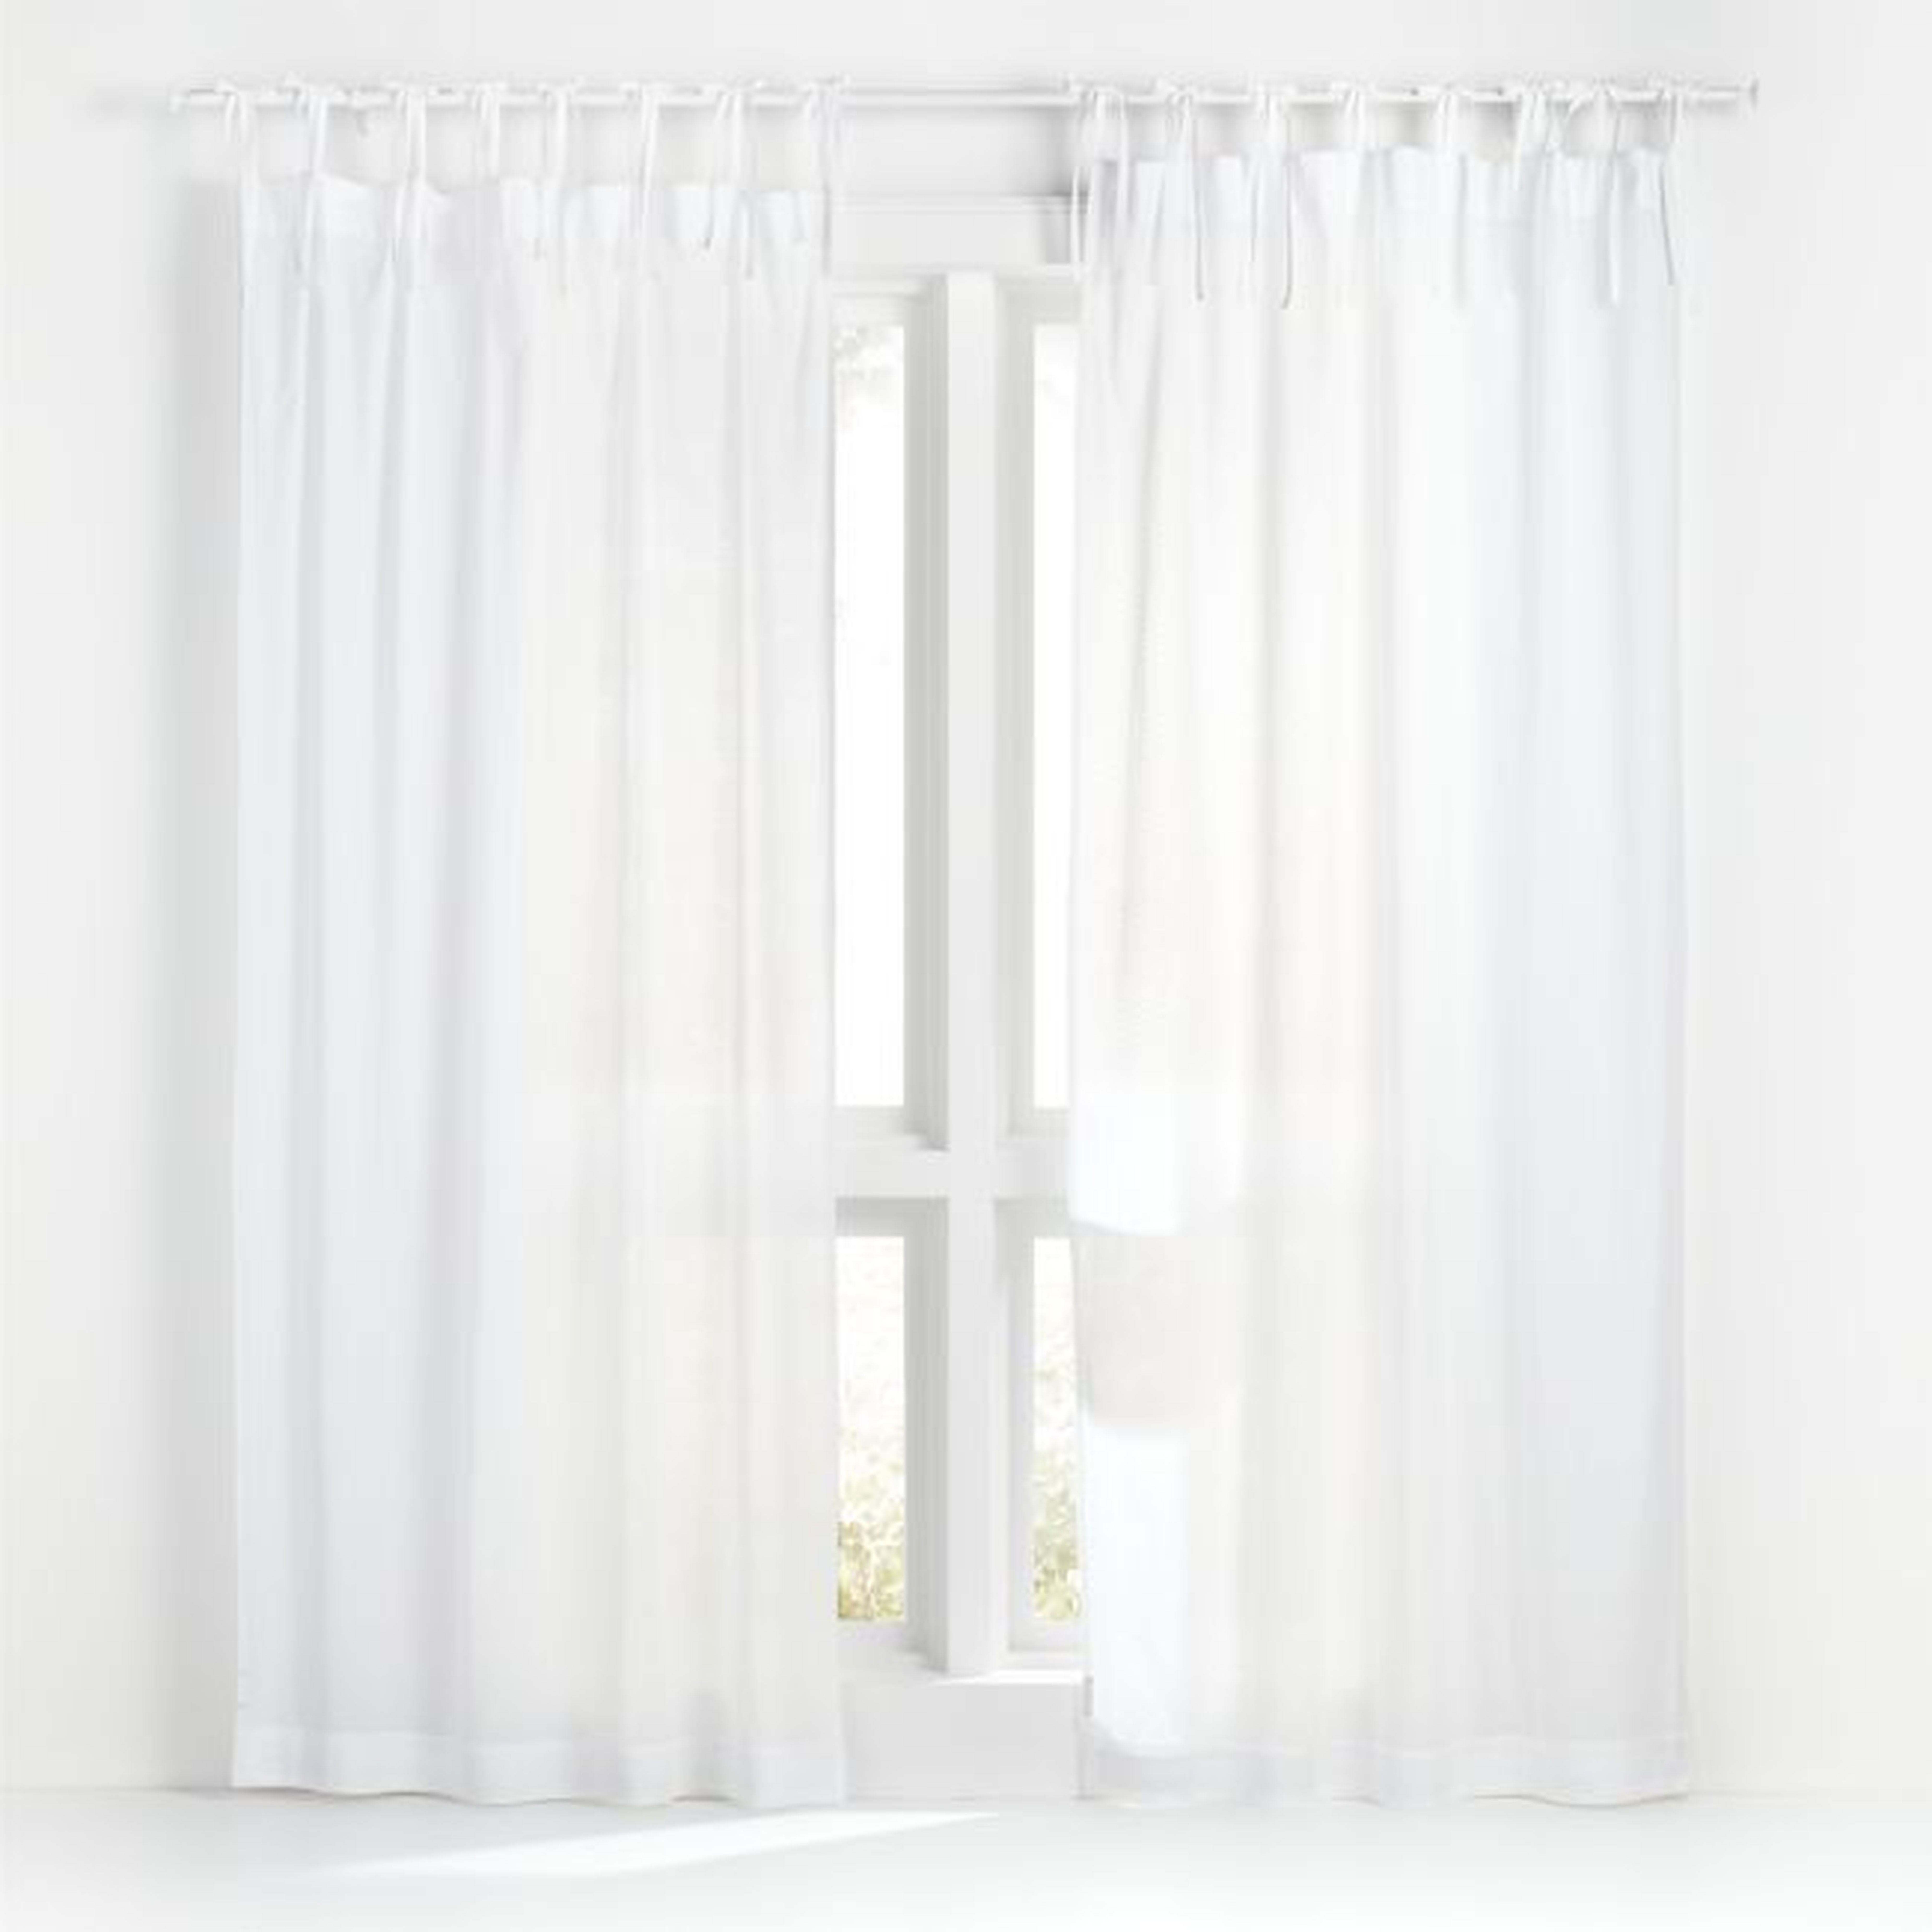 84" Sheer Dobby White Curtain Panel - Crate and Barrel